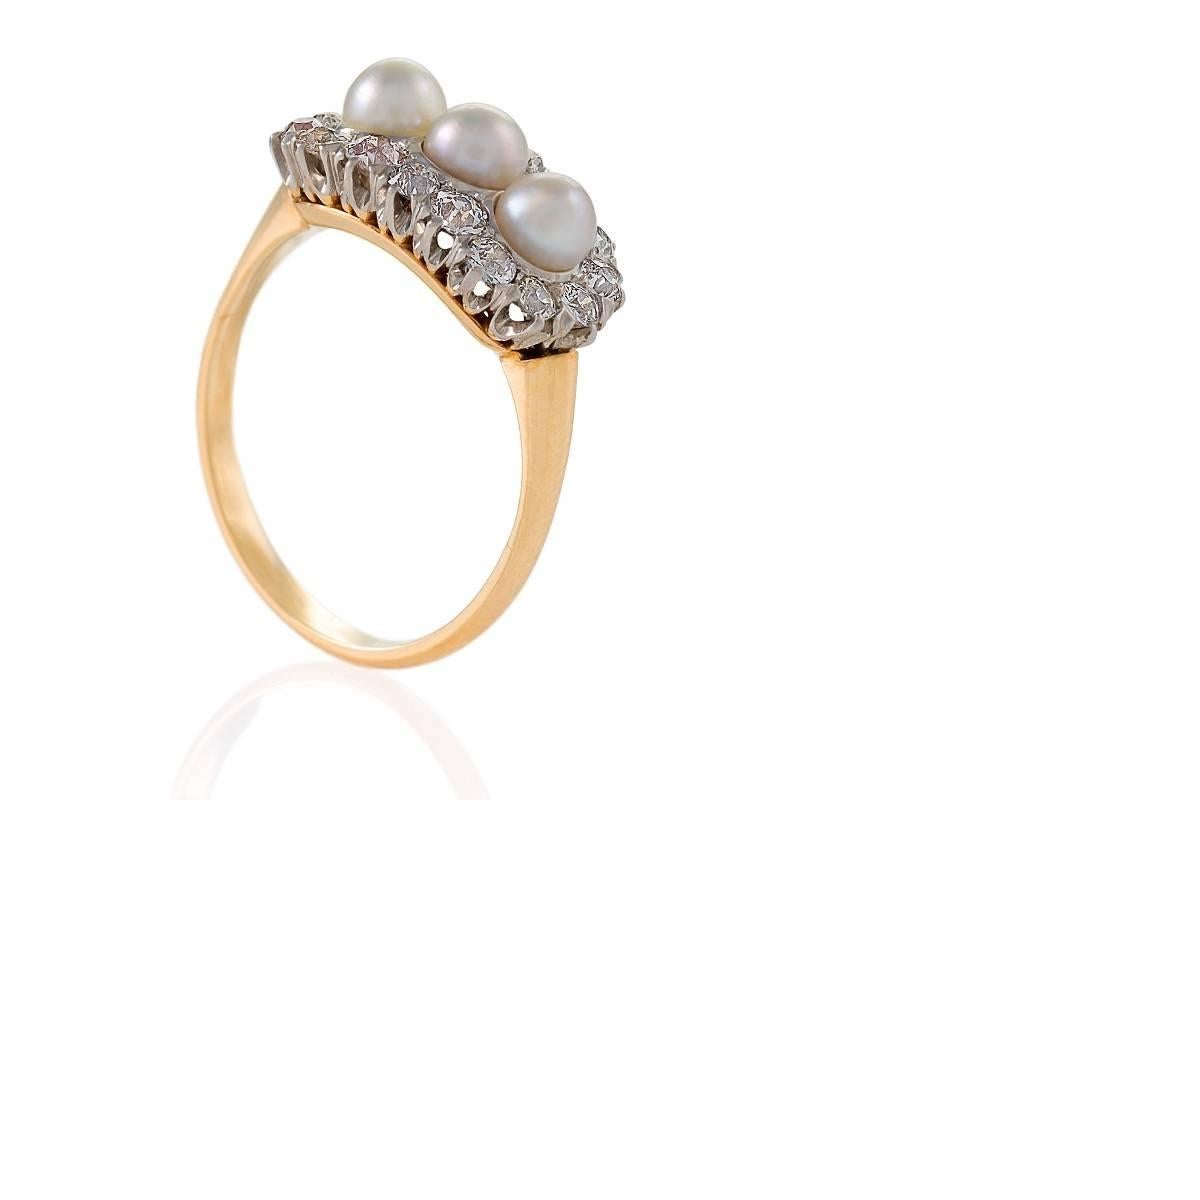 This romantic ring is perfectly Edwardian, with its triplet of creamy, lustrous pearls, center-set in platinum amongst a nest of brilliantly sparkling diamonds. The balance between the the milky pearls and the scintillating diamonds creates a unique